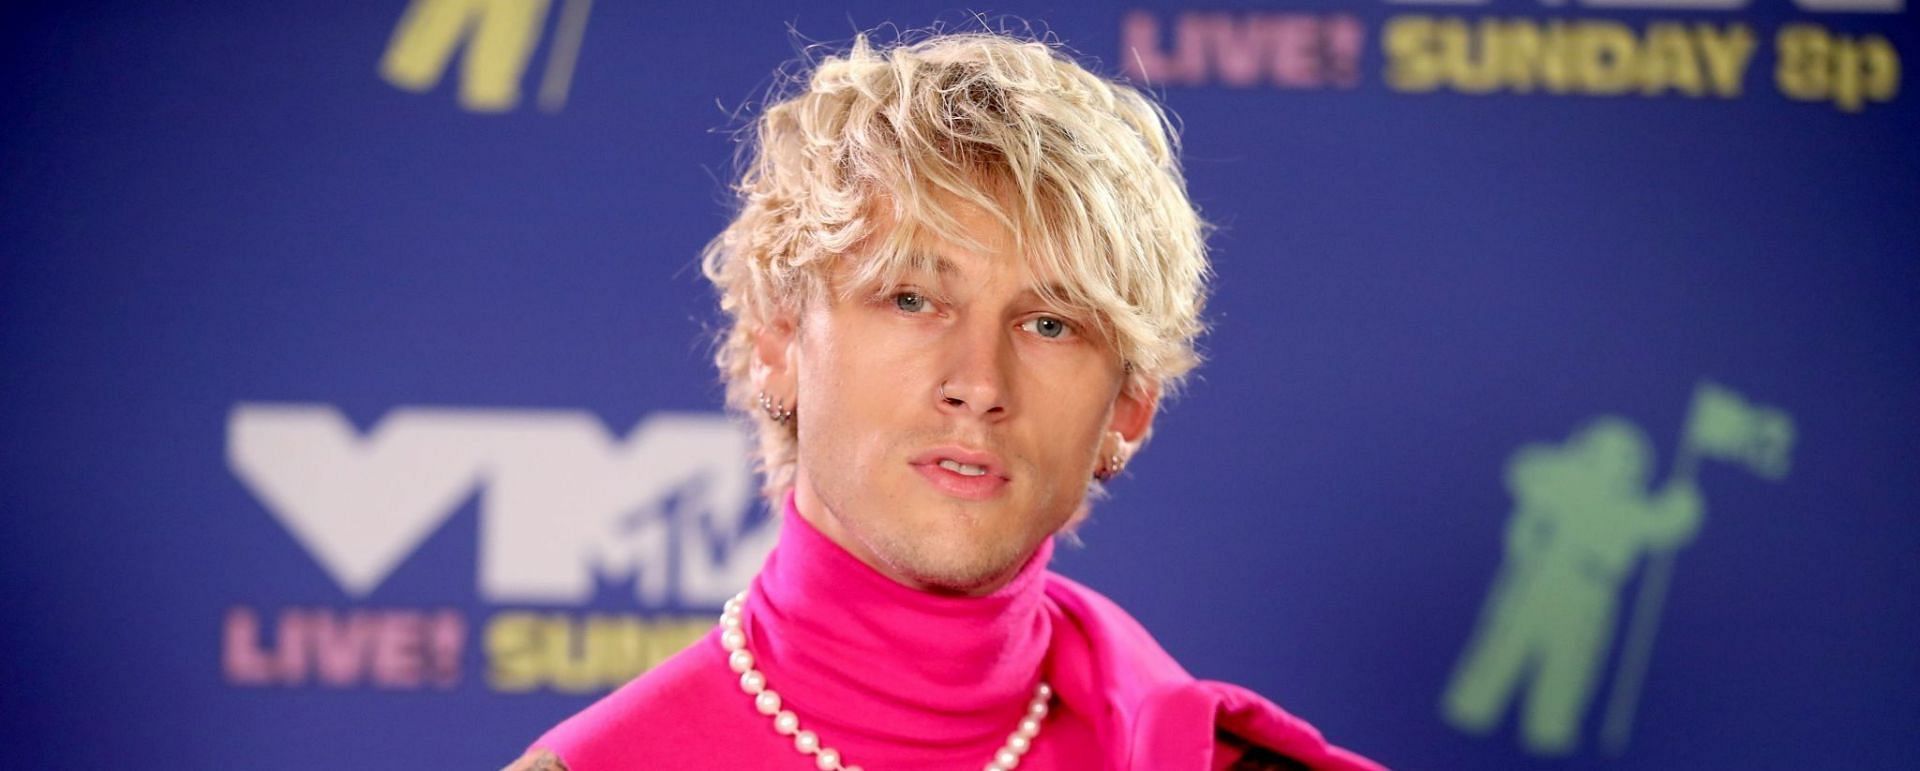 Machine Gun Kelly made some inappropriate comments about black women during 2012 BET Awards (Image via Rich Fury/Getty Images)